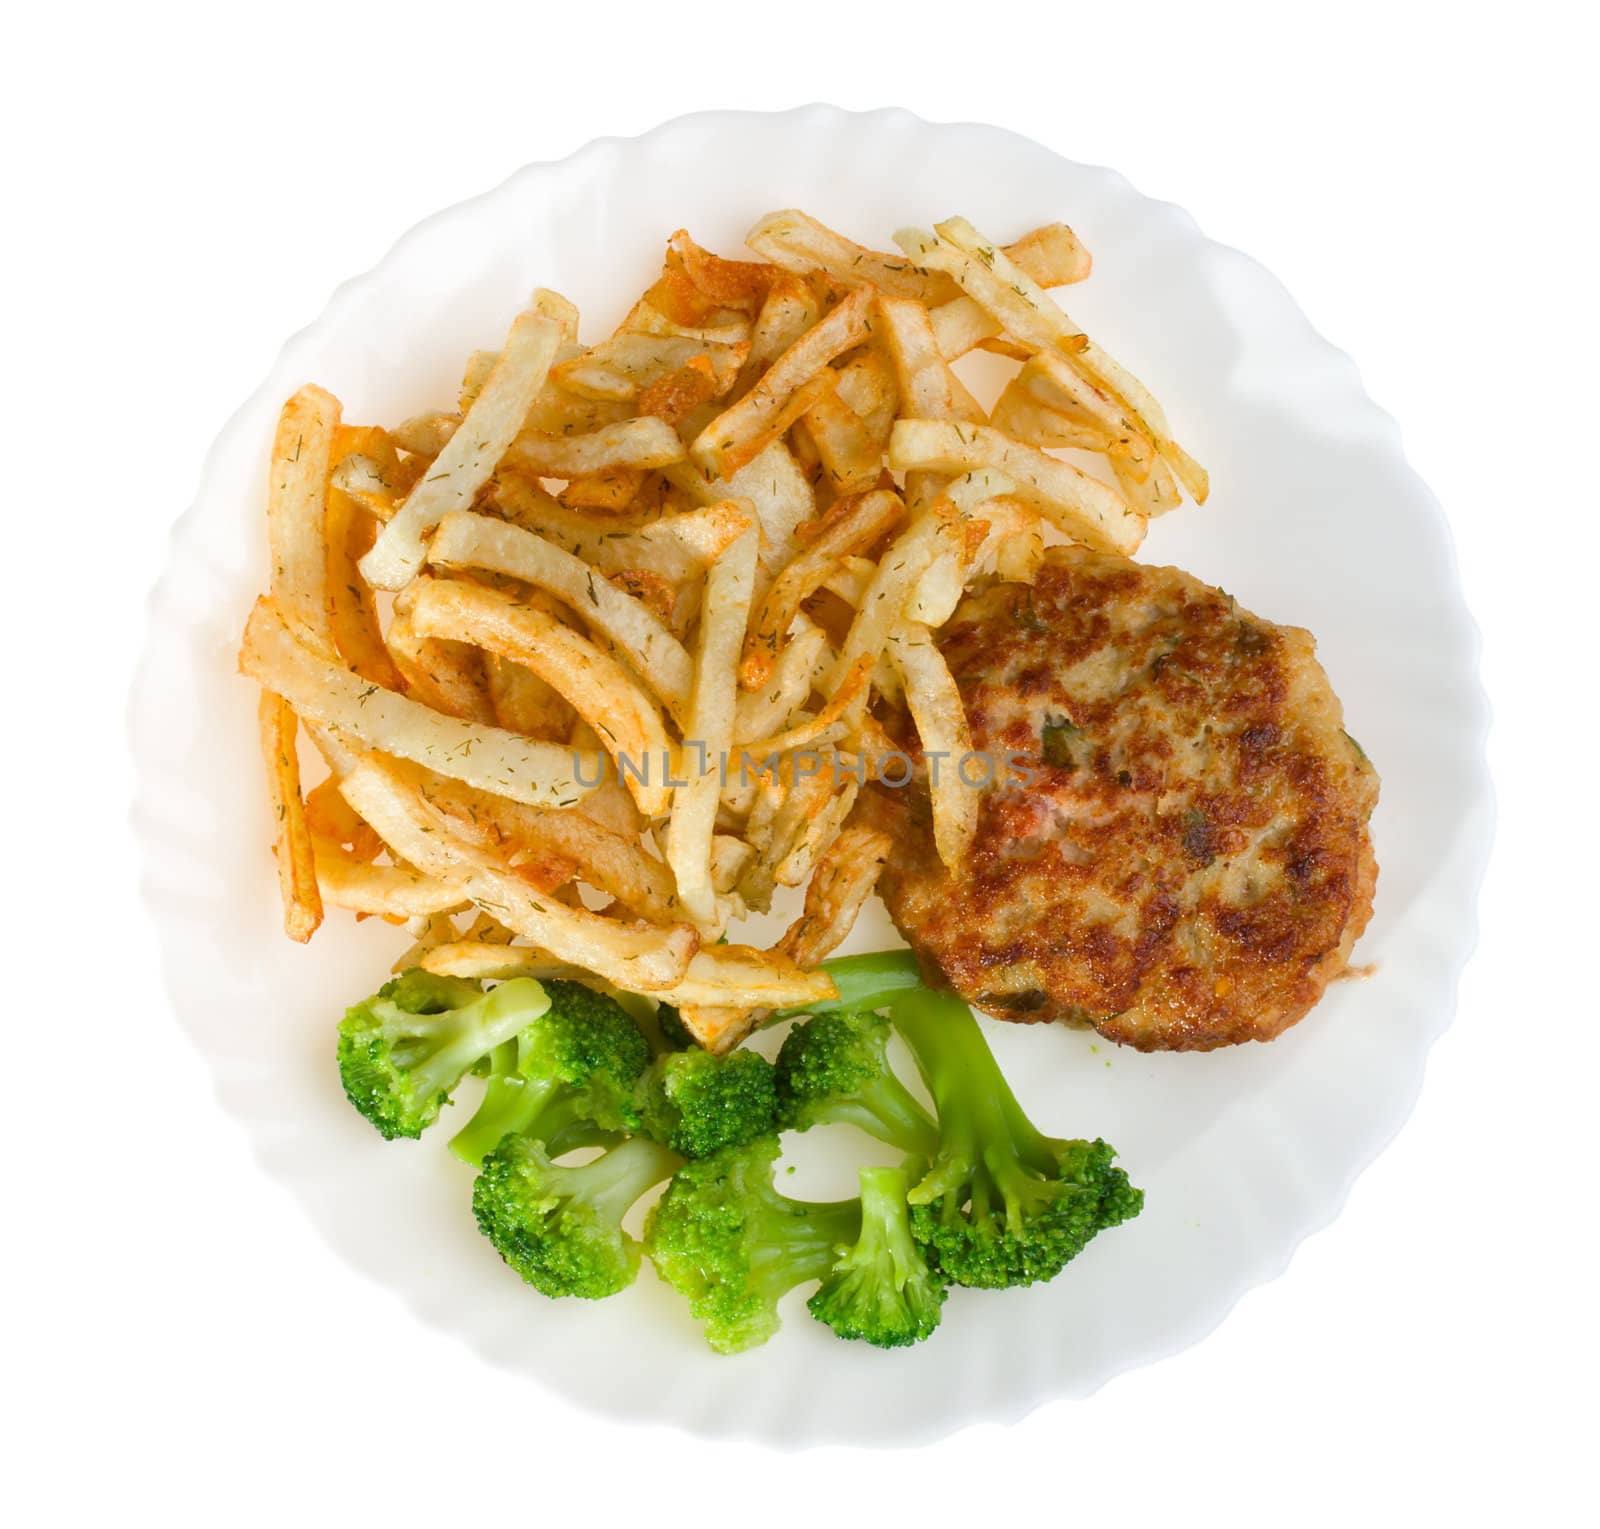 fried potatoes with cutlet and broccoli on plate, isolated